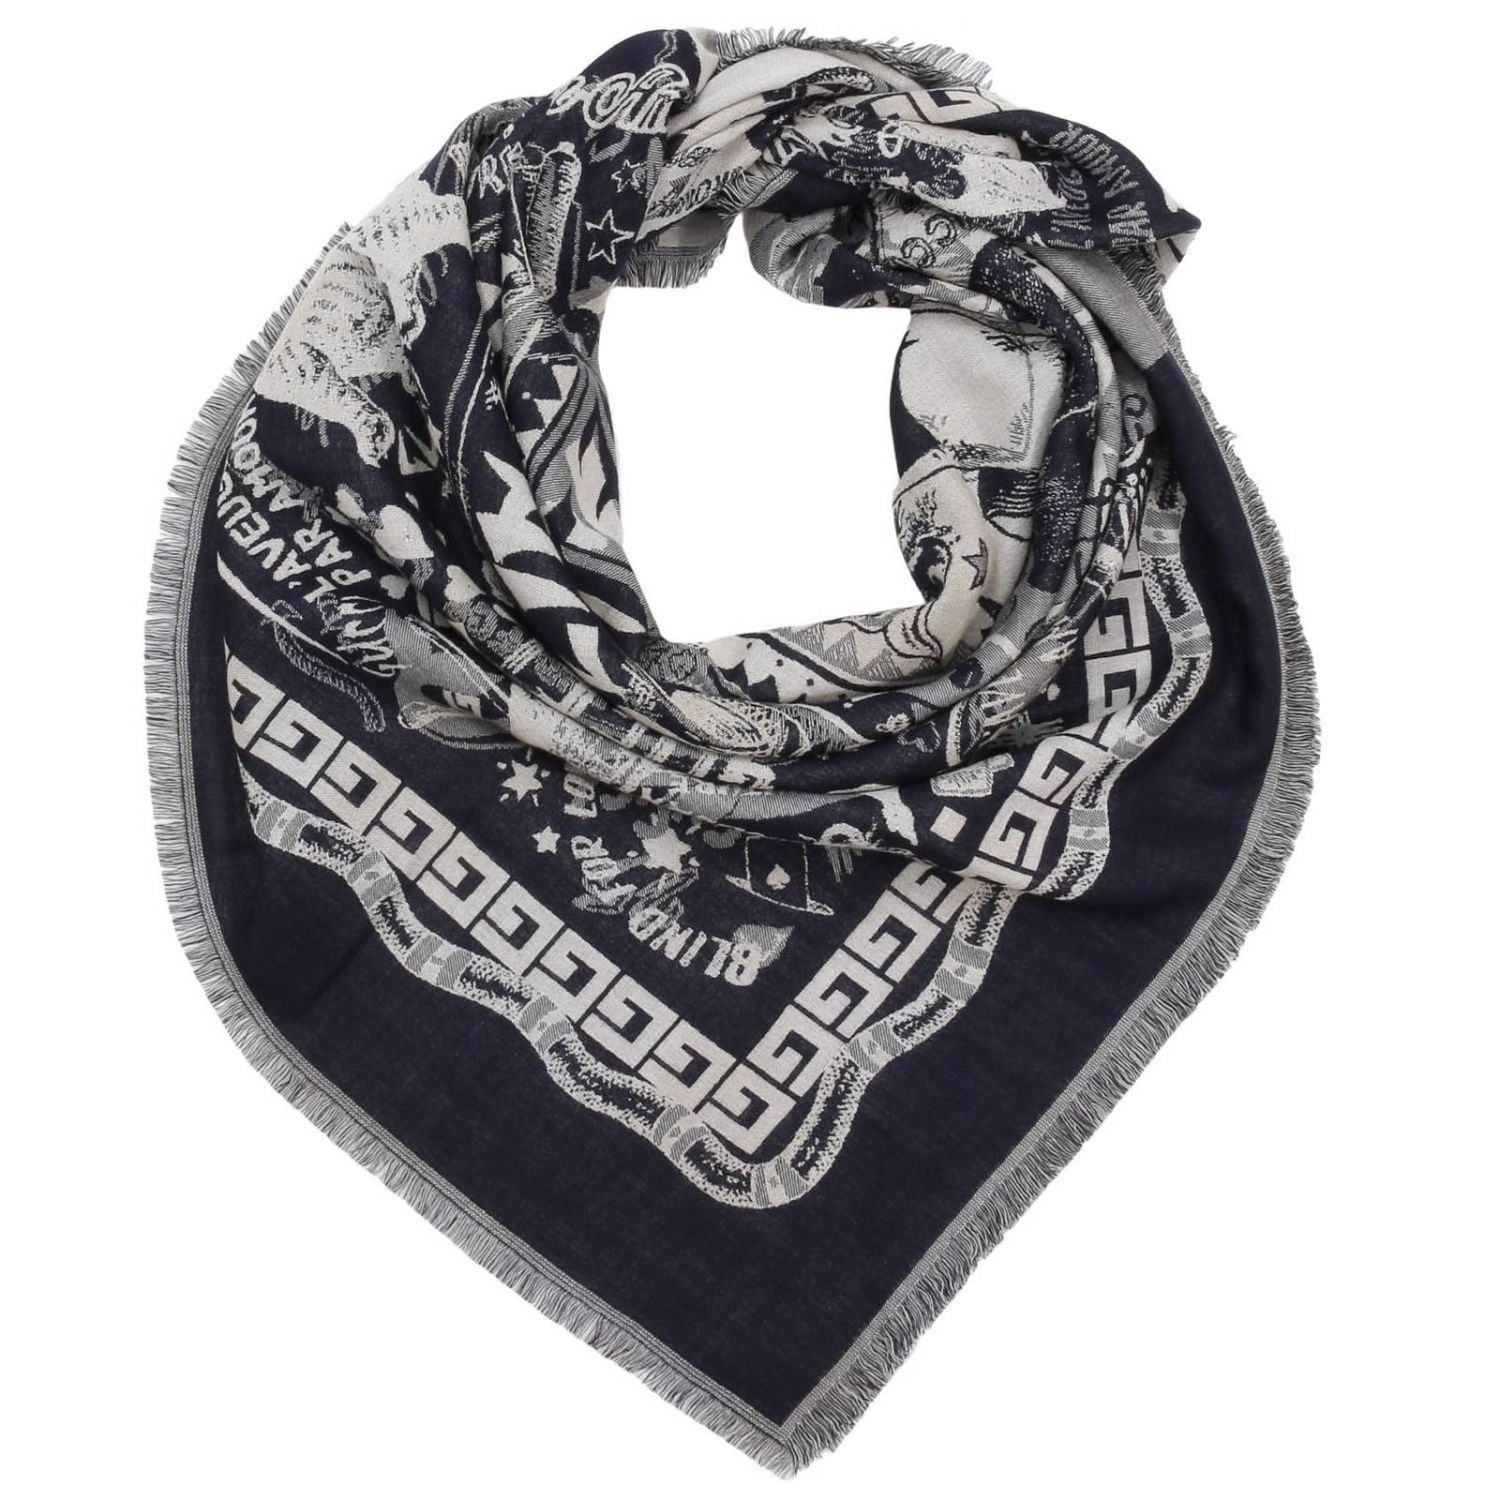 Scarf 110 X 110 Cm Wool And Silk Scarf With Multi-pattern And Love Writing | Giglio.com